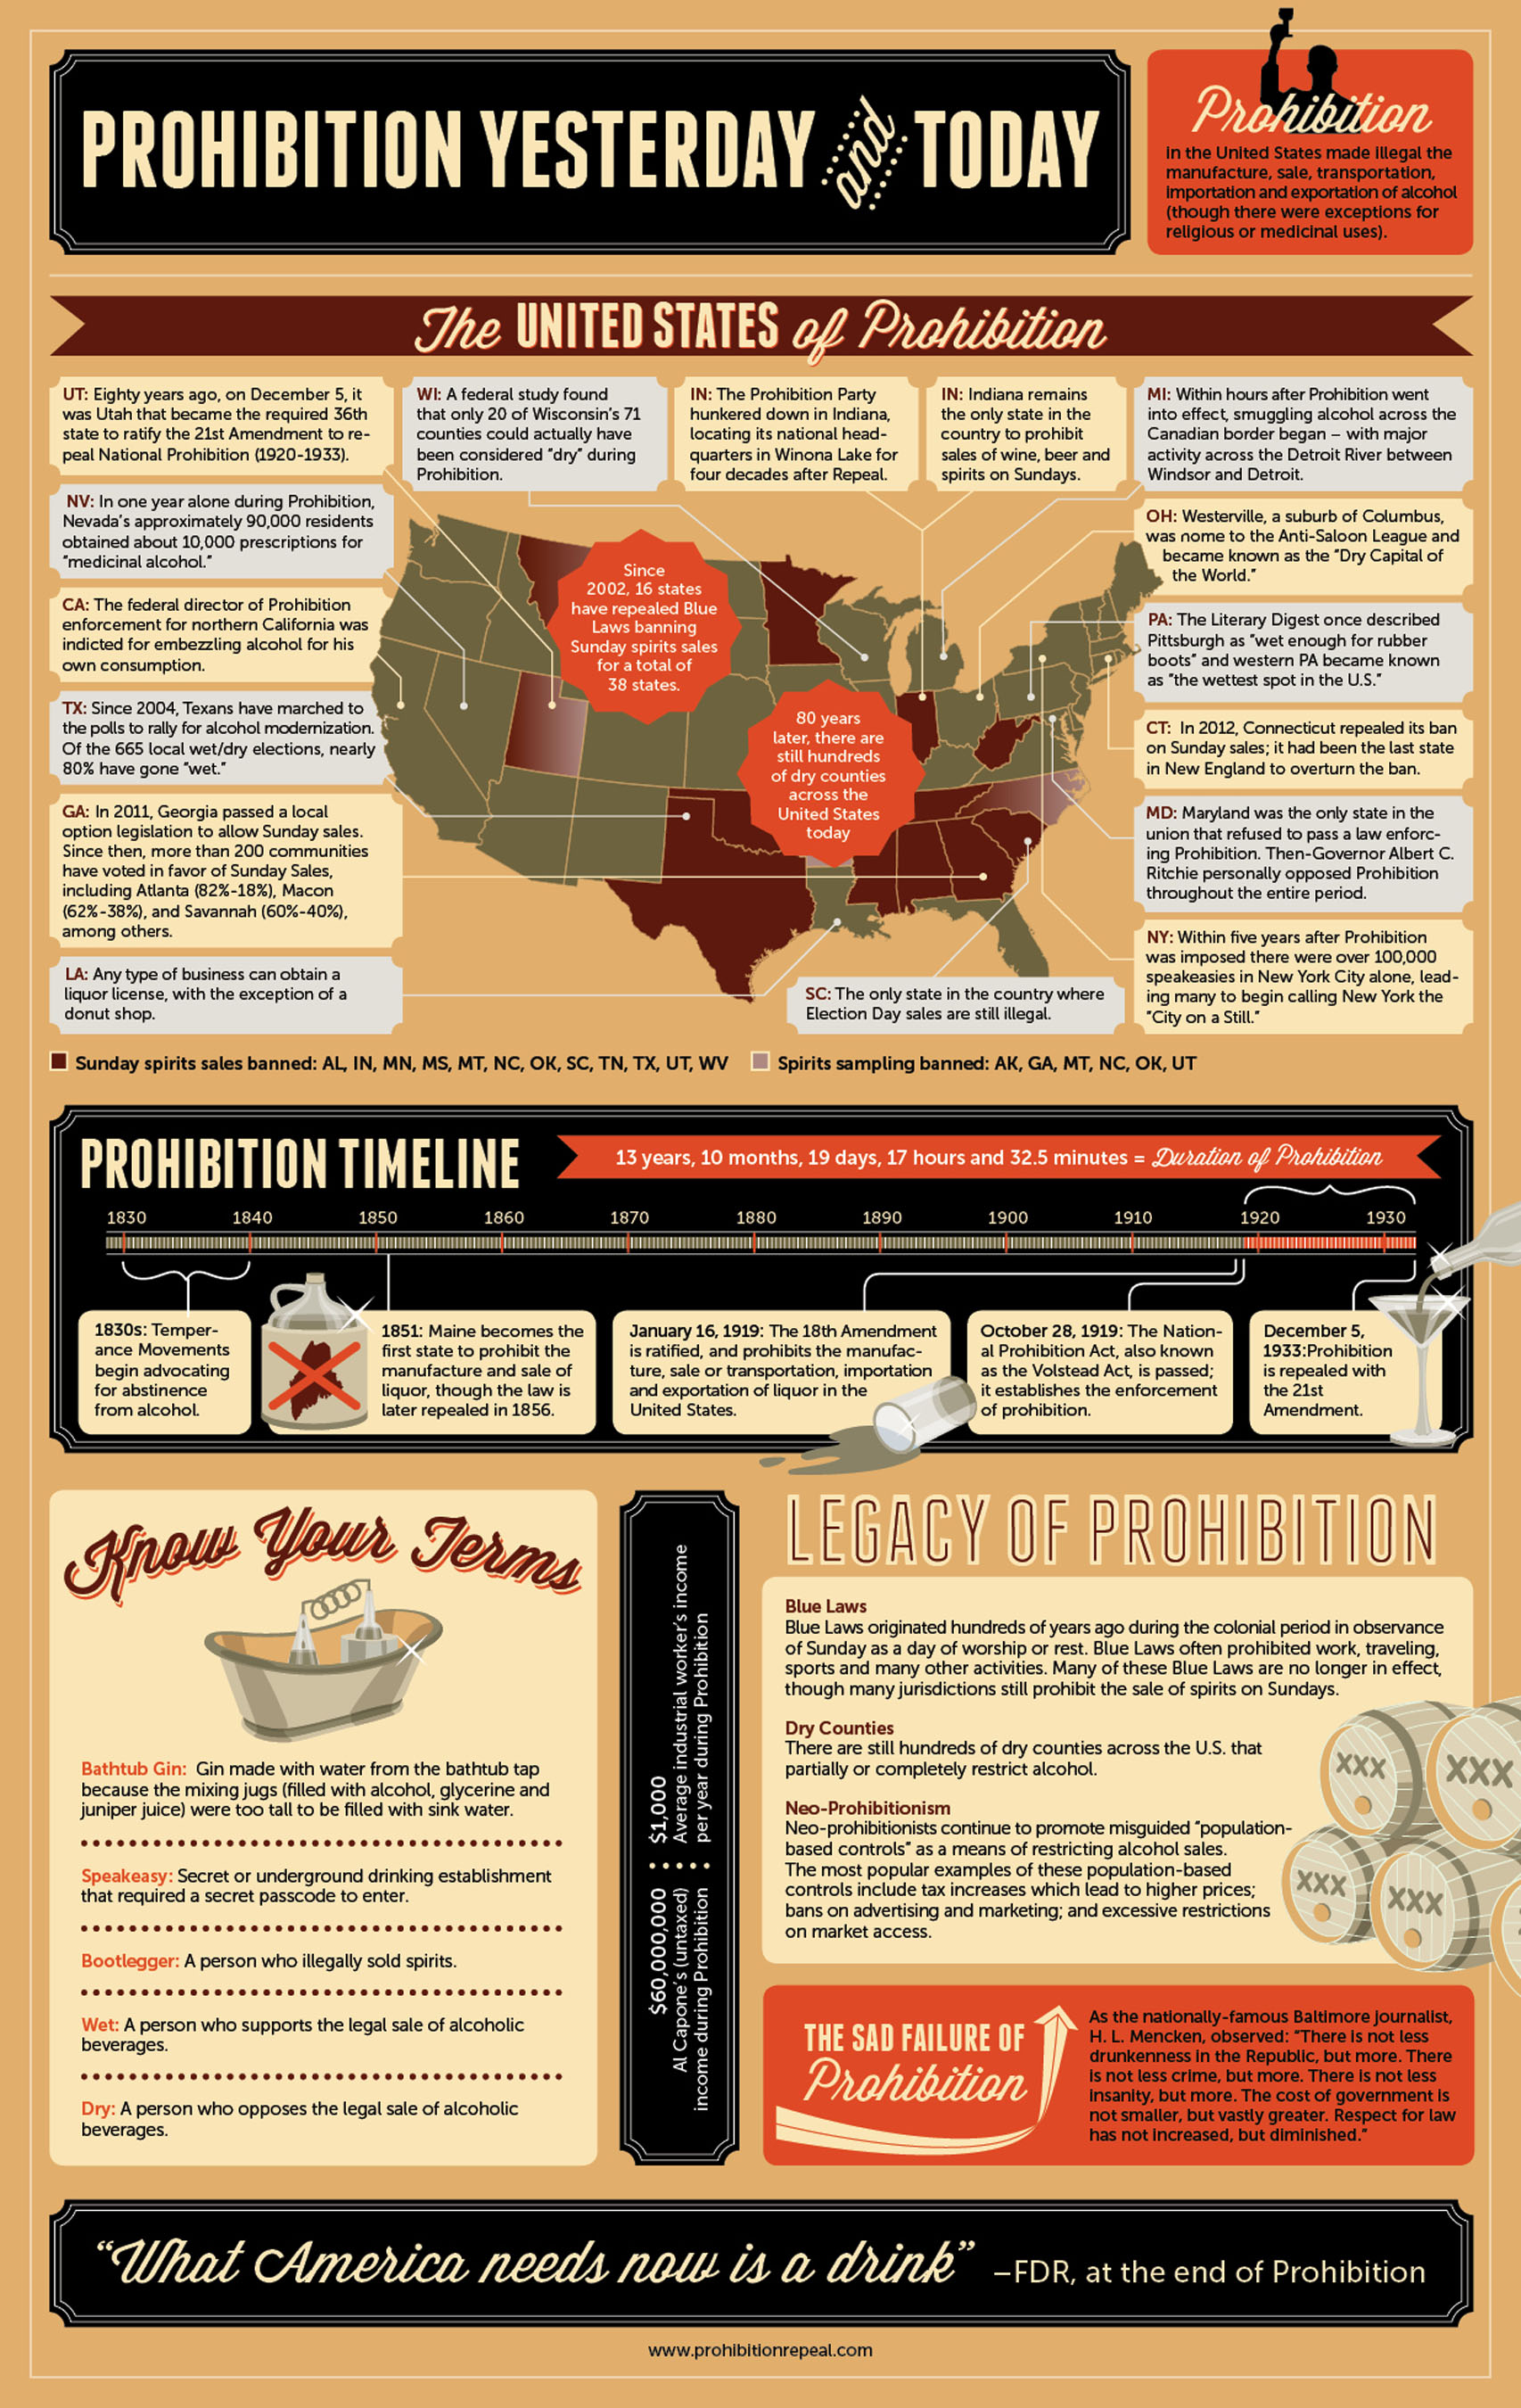 The United States of Prohibition Timeline Infographic